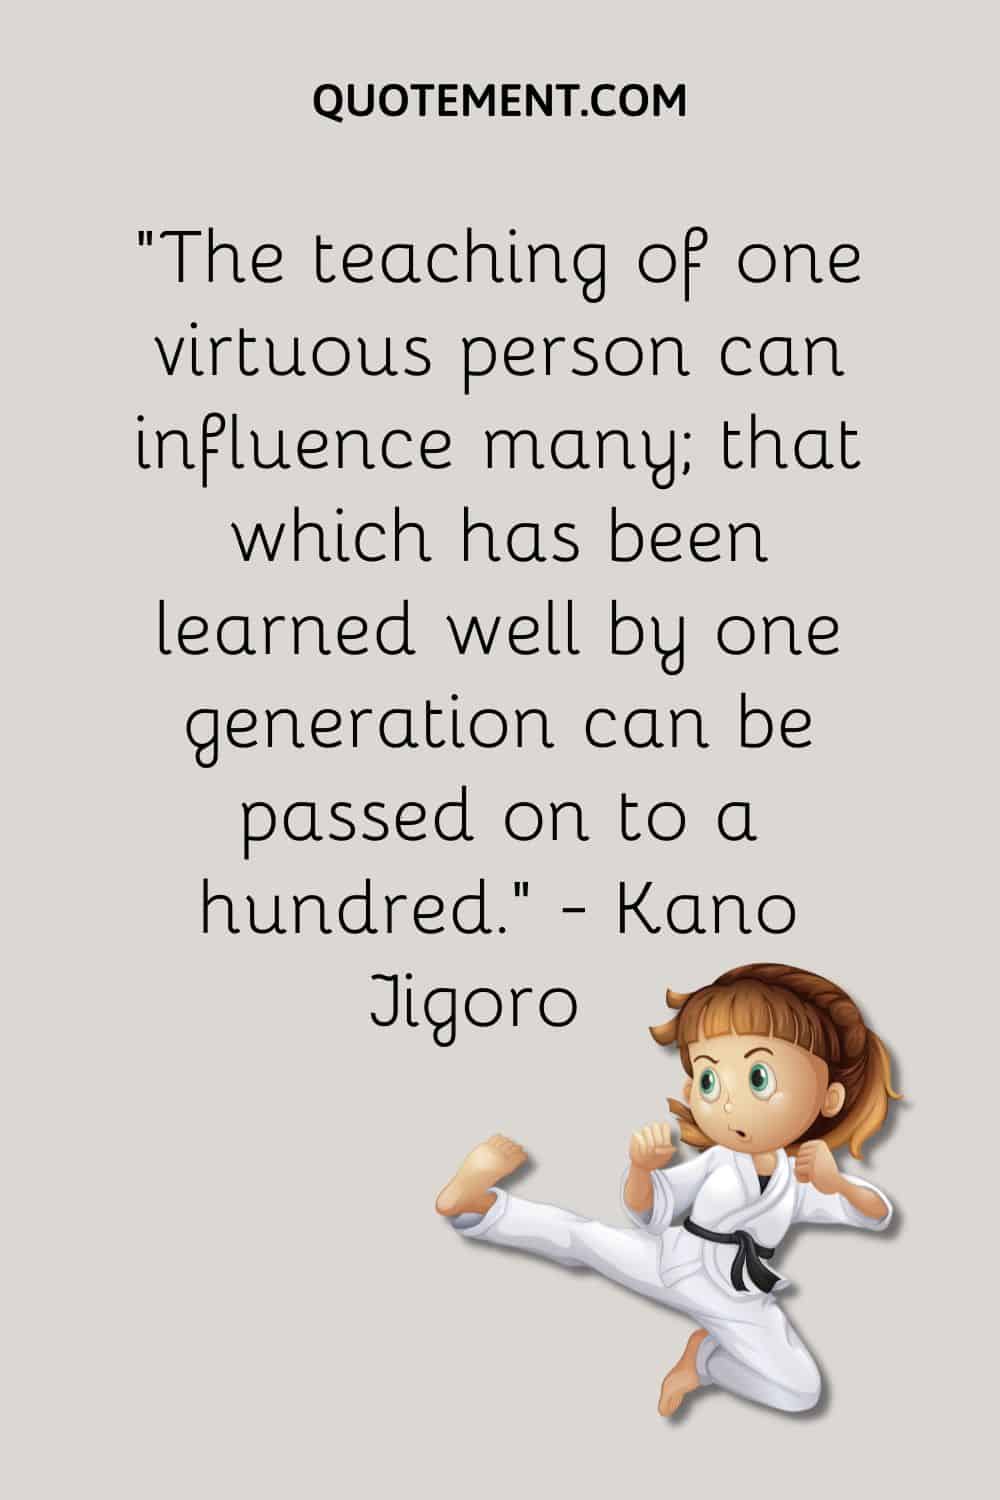 The teaching of one virtuous person can influence many